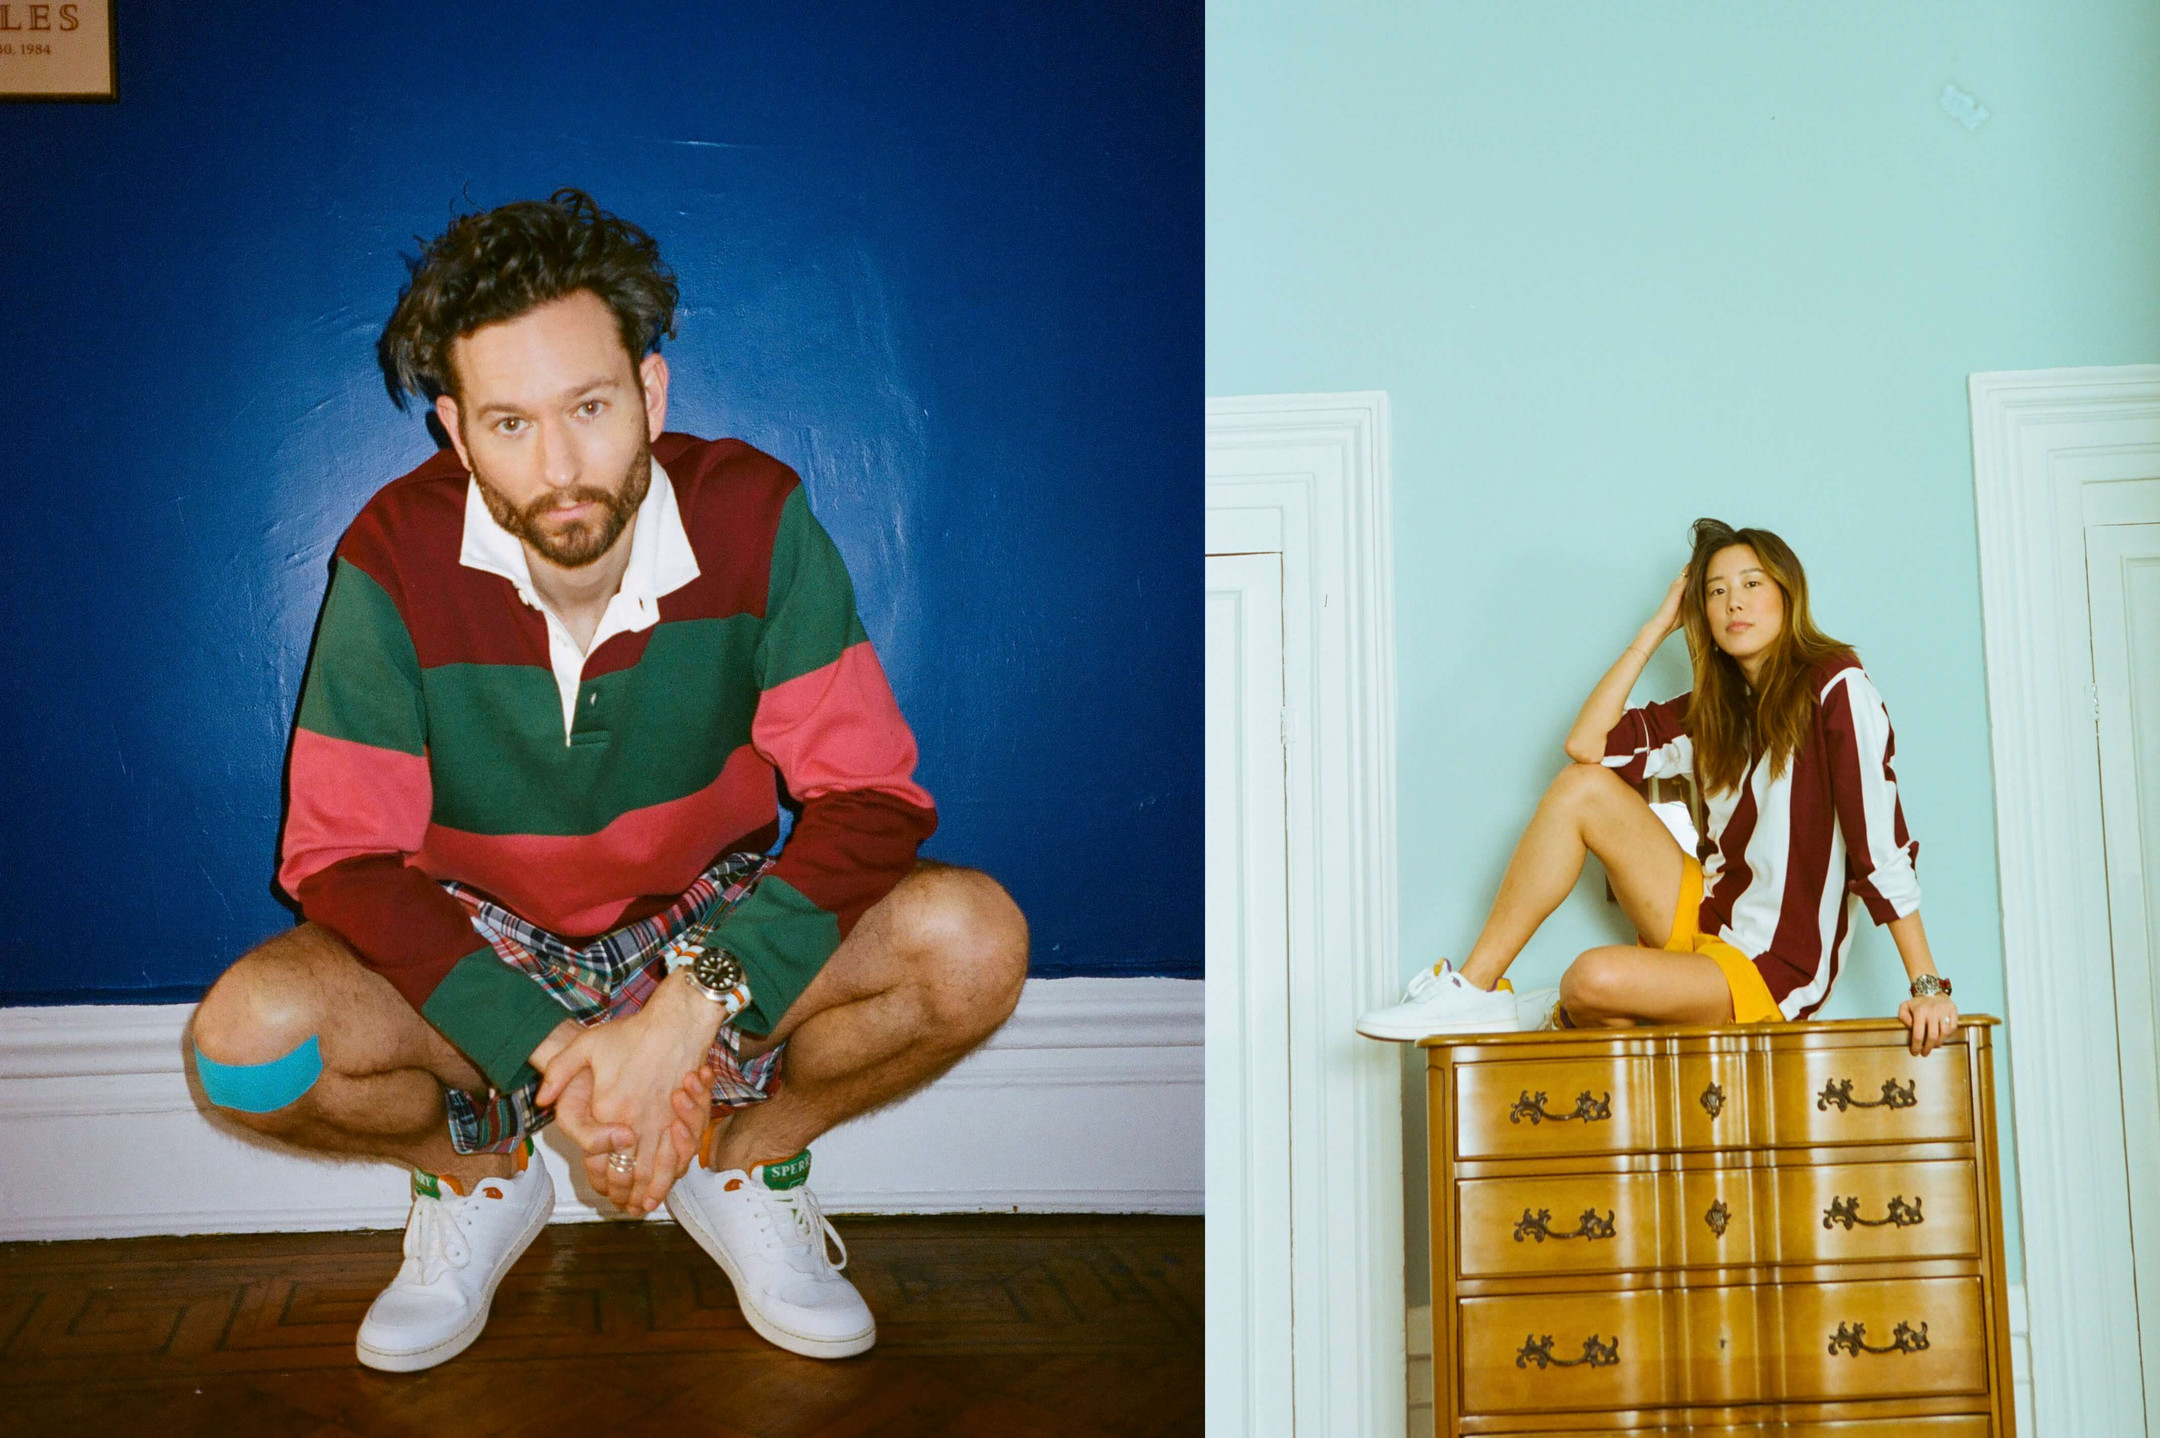 Male model wearing the Mossley Rugby, the Bishop Patchwork Madras Shorts, the Sperry x Rowing Blazers Cloud Cup Sneaker in orange and green. Female model wearing the Game Rugby in burgundy and white